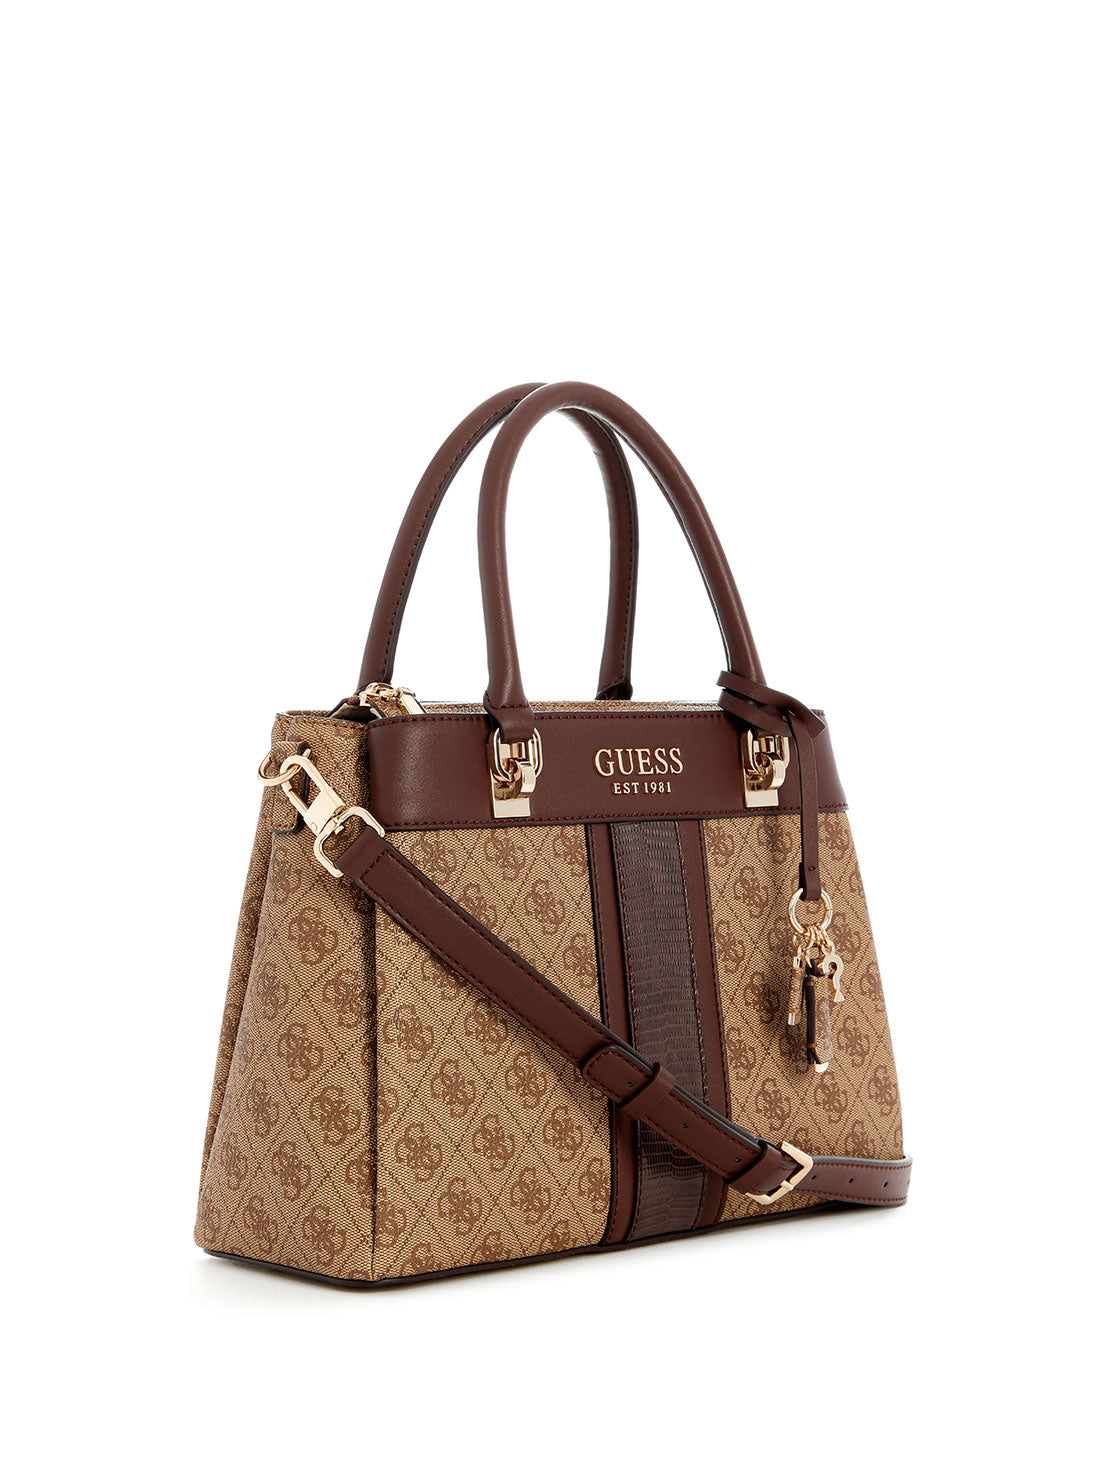 GUESS Brown Logo Cristiana Satchel Bag side view